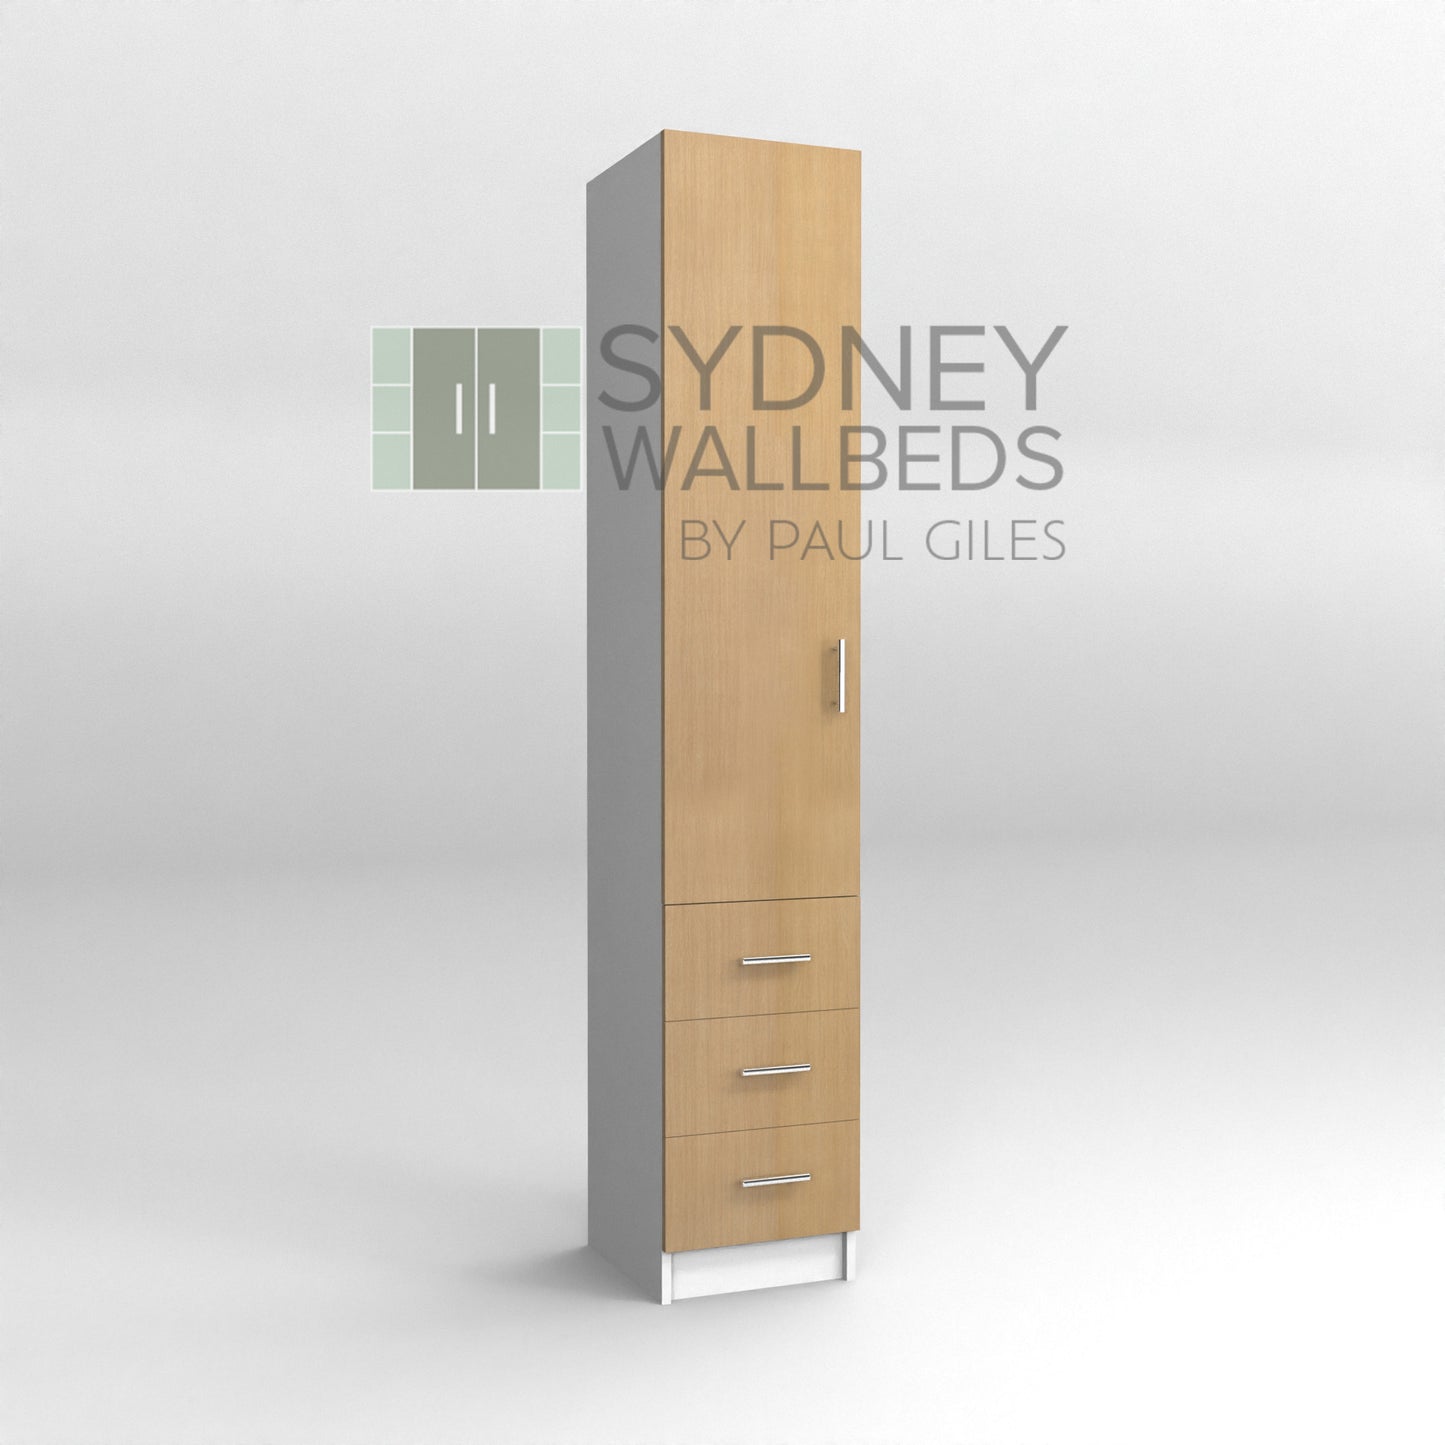 PULL-OUT HANGING CABINETS 500mm - Alpha WallBed - (Premium Colour Range)